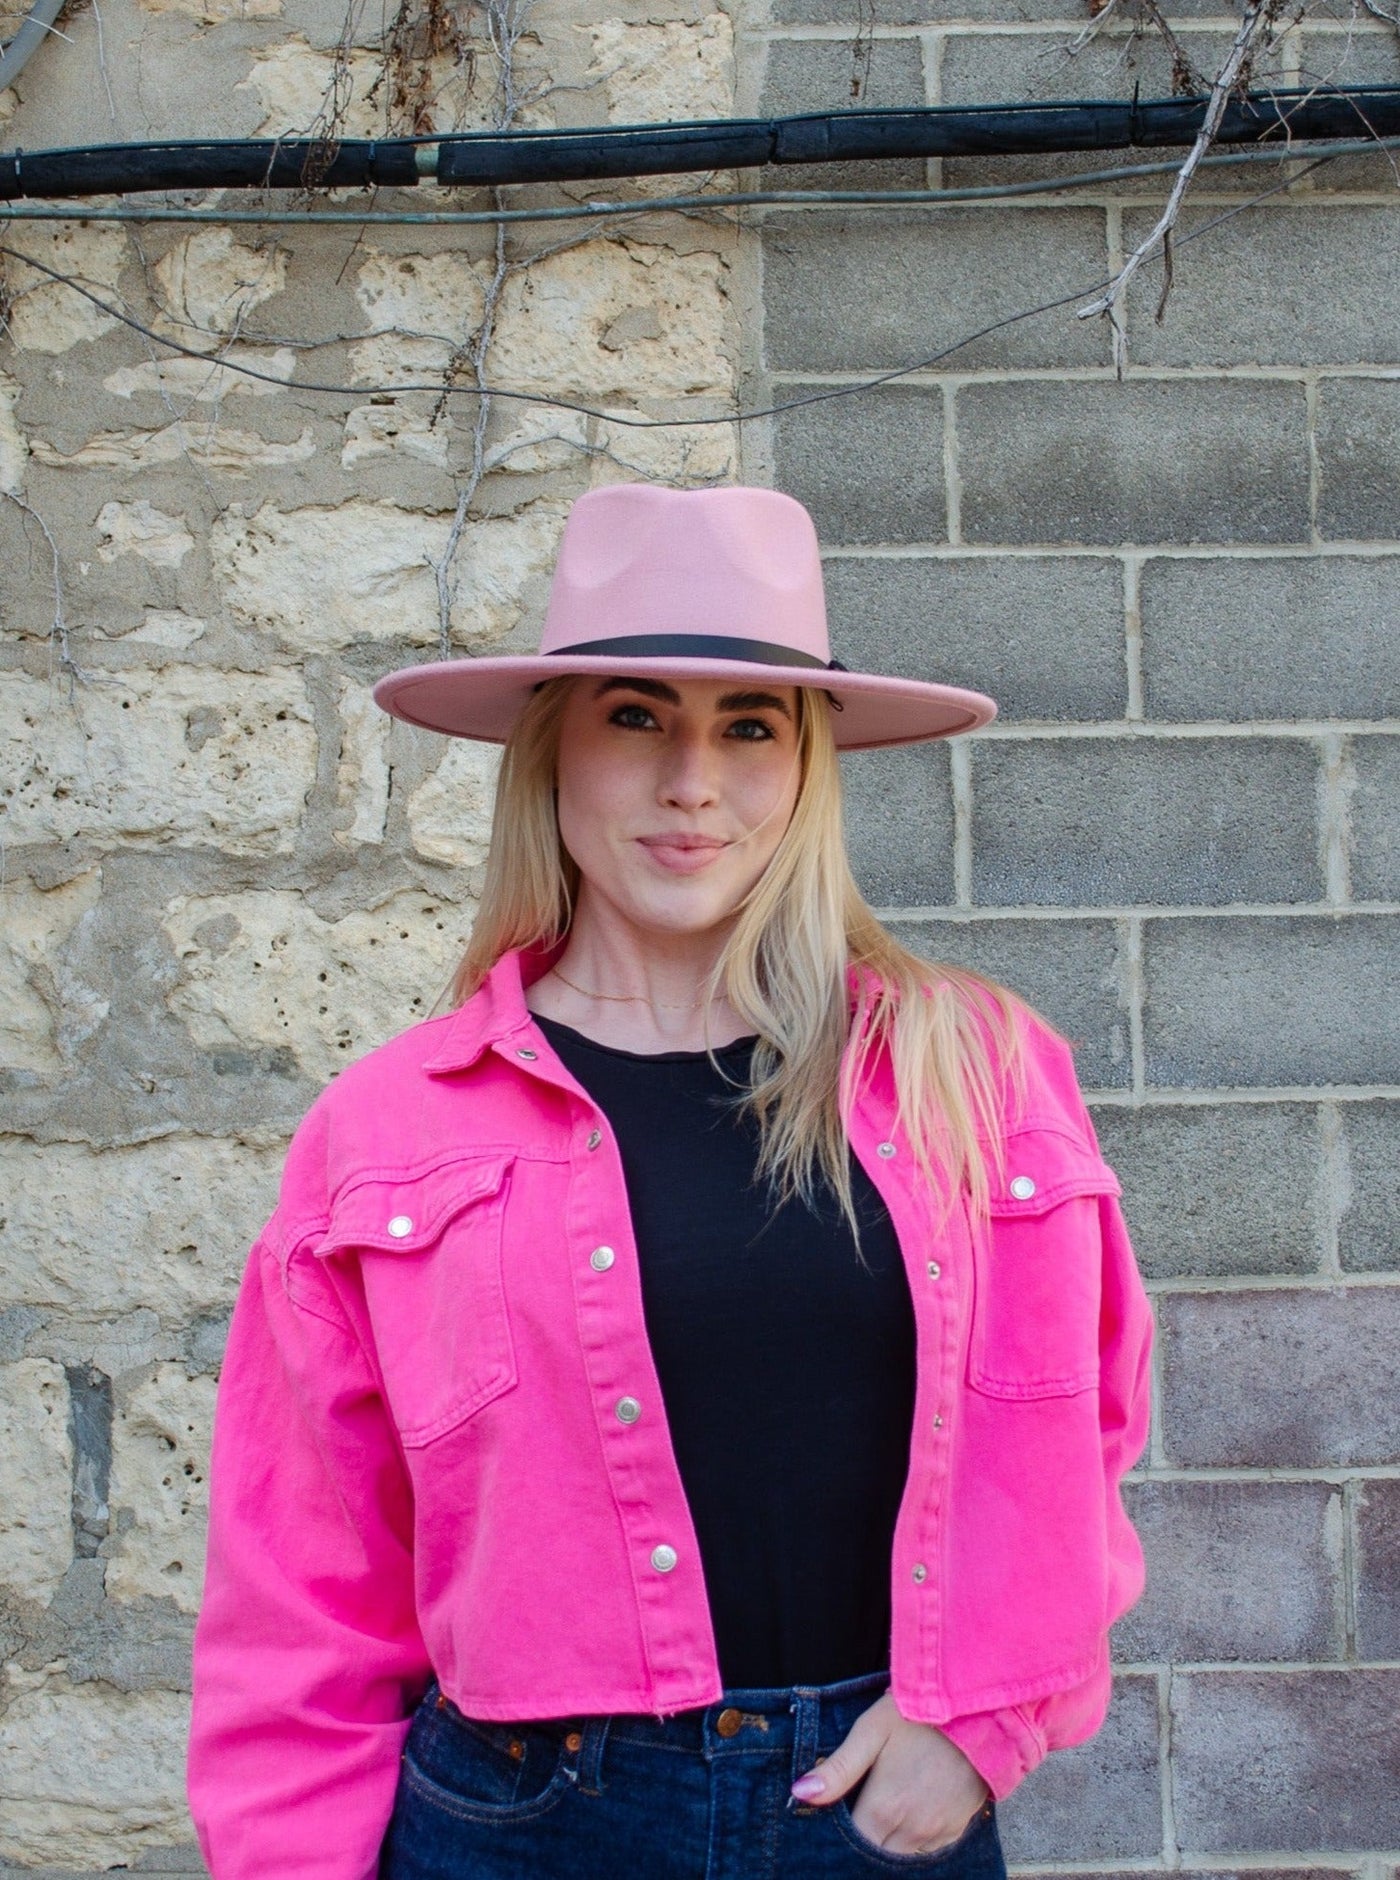 Model is wearing a wide brimmed fedora style hat thats light pink and has a faux leather black strap.